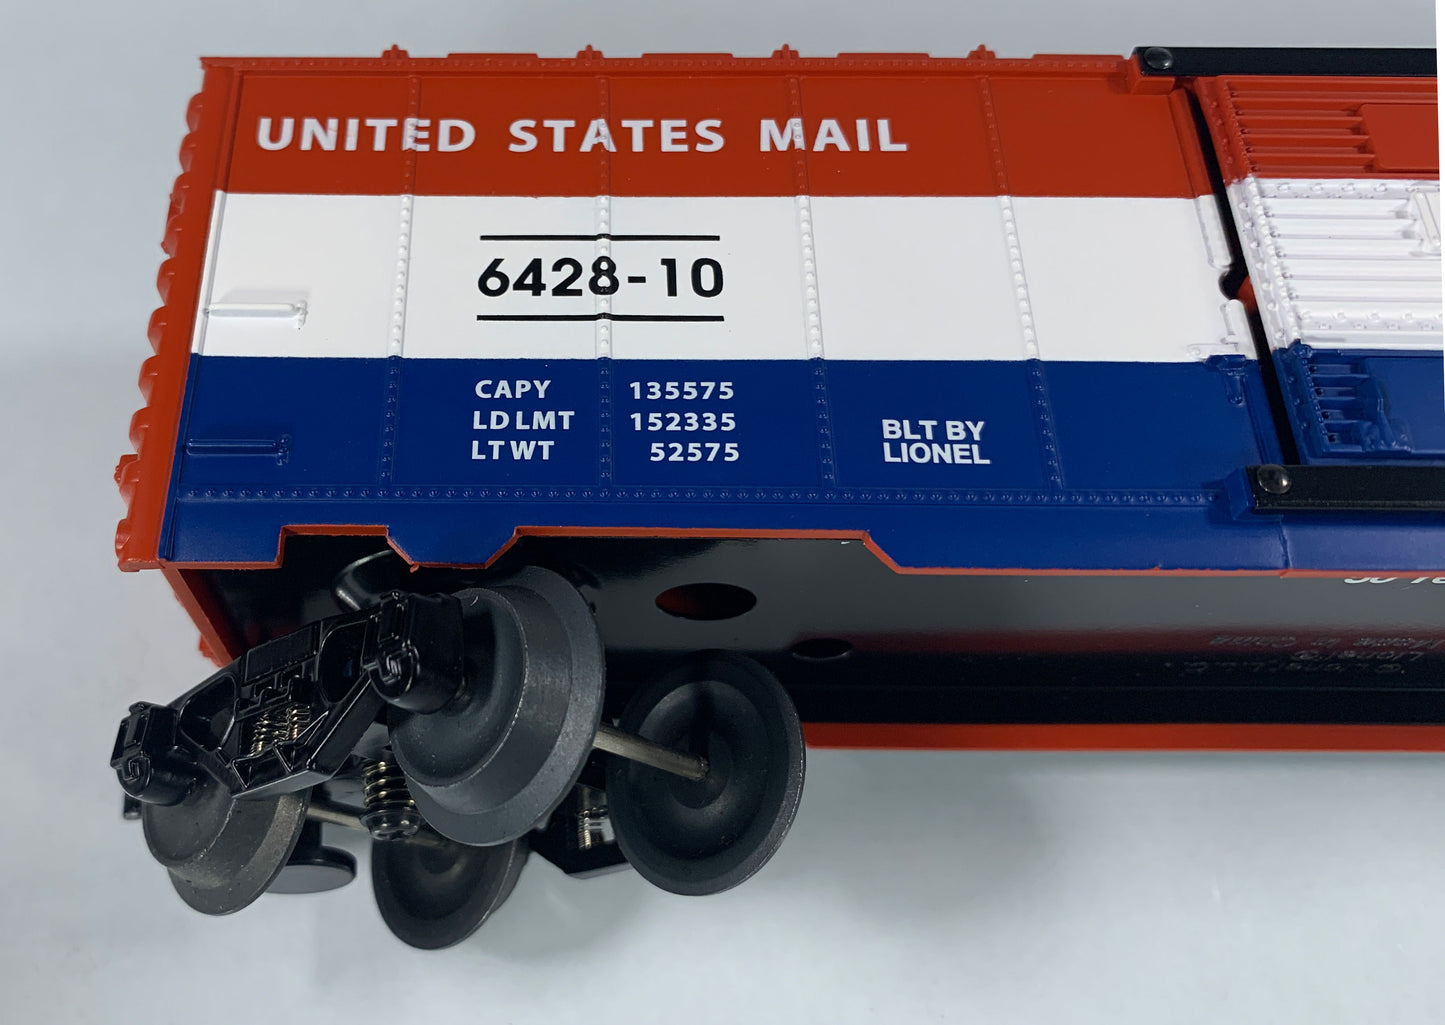 LIONEL • O GAUGE • 2010 LRRC 50th Anniversary US Mail Boxcar 6-15034 • NEW OLD STOCK